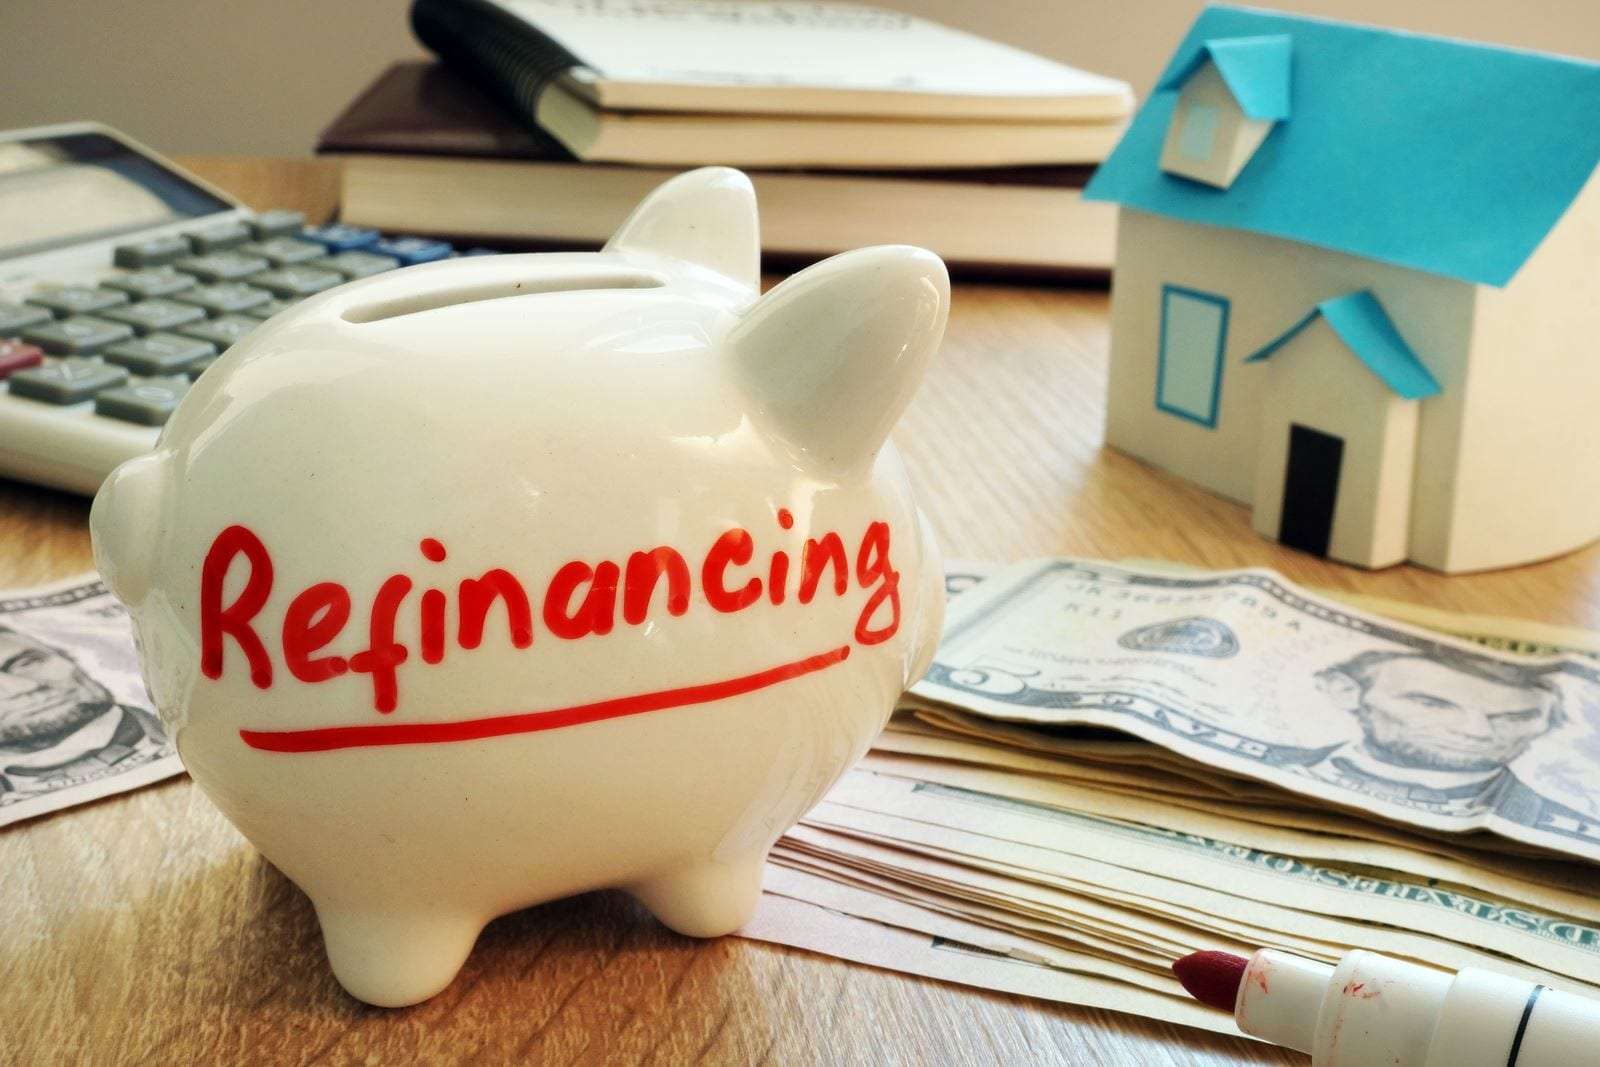 How to Refinance Investment Property to Buy Another